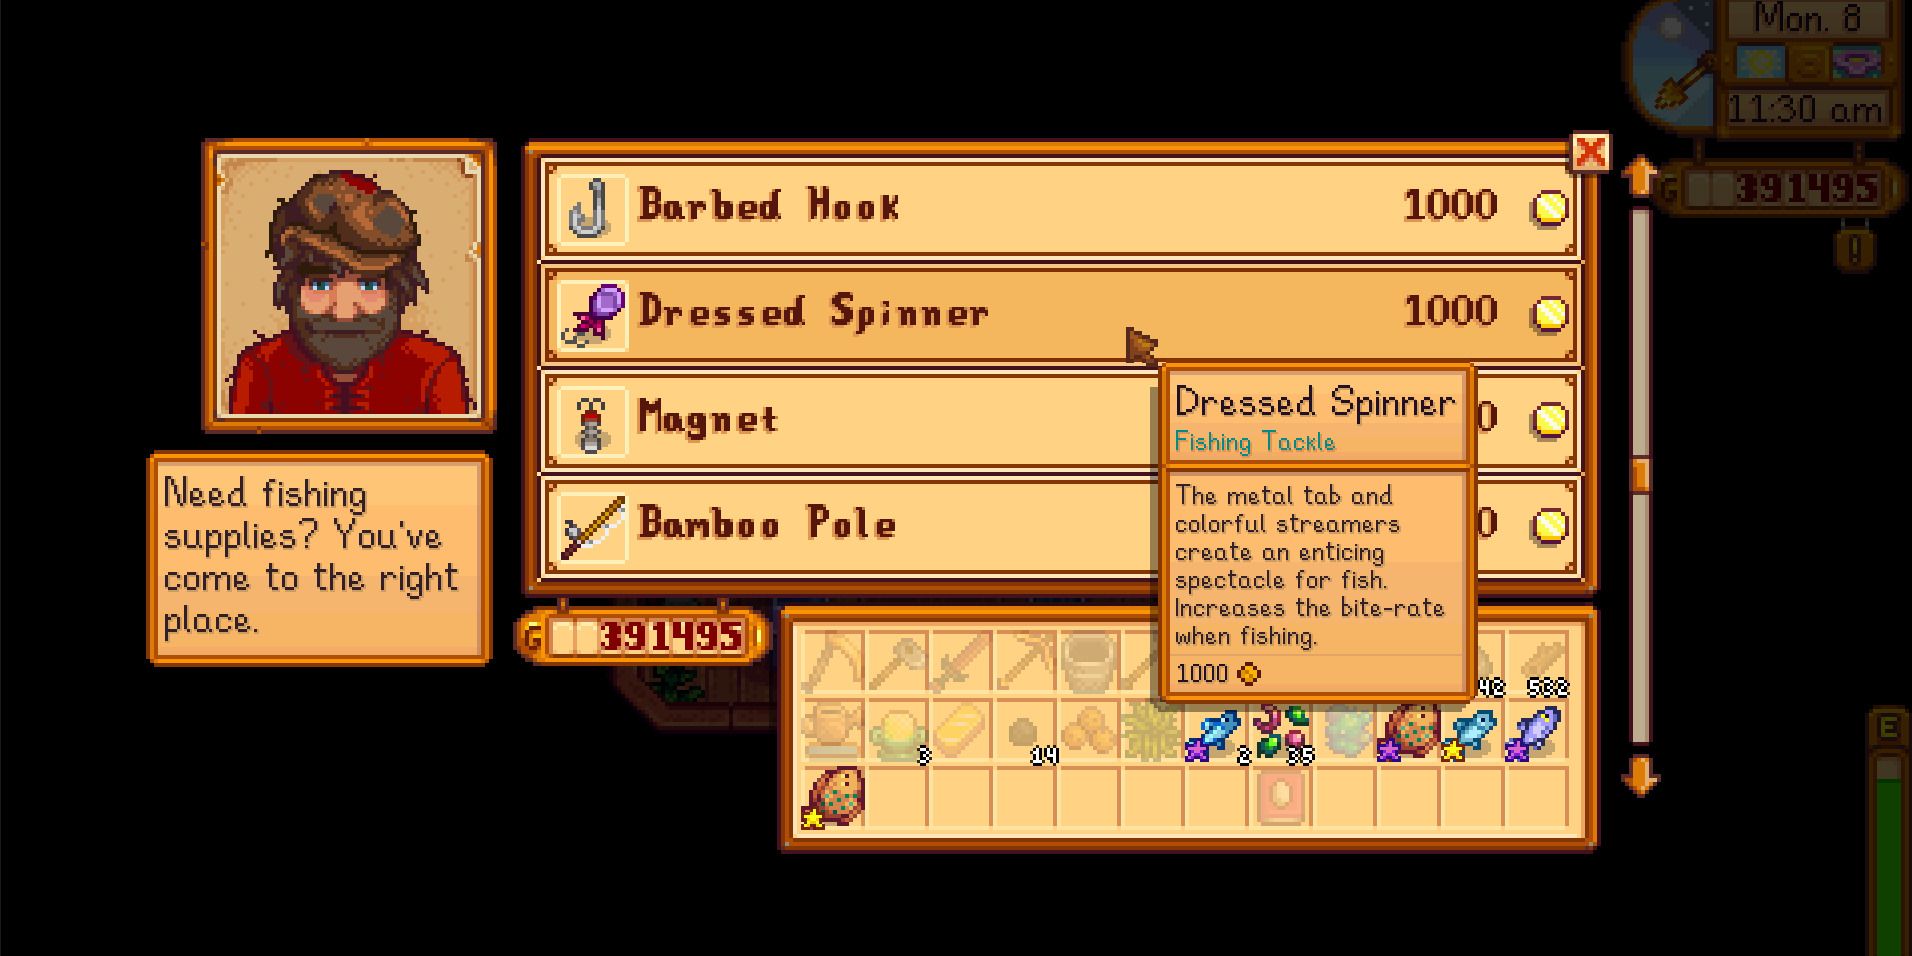 Image of a Dressed Spinner available for purchase from Willy in Stardew Valley